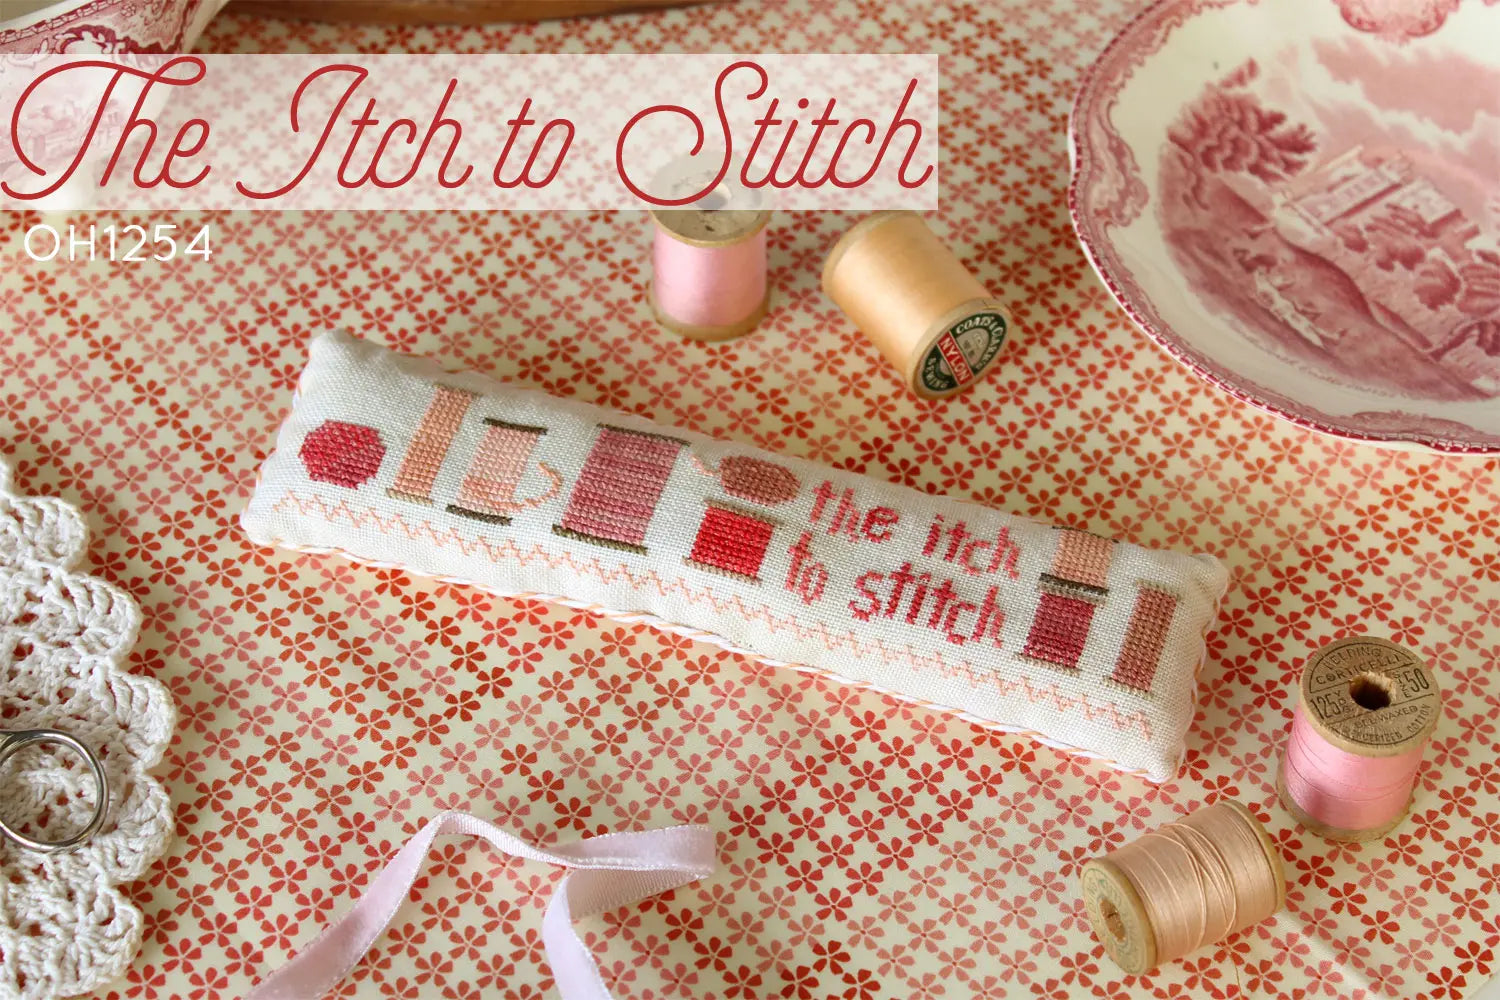 The Itch to Stitch by October House (pre-order) October House